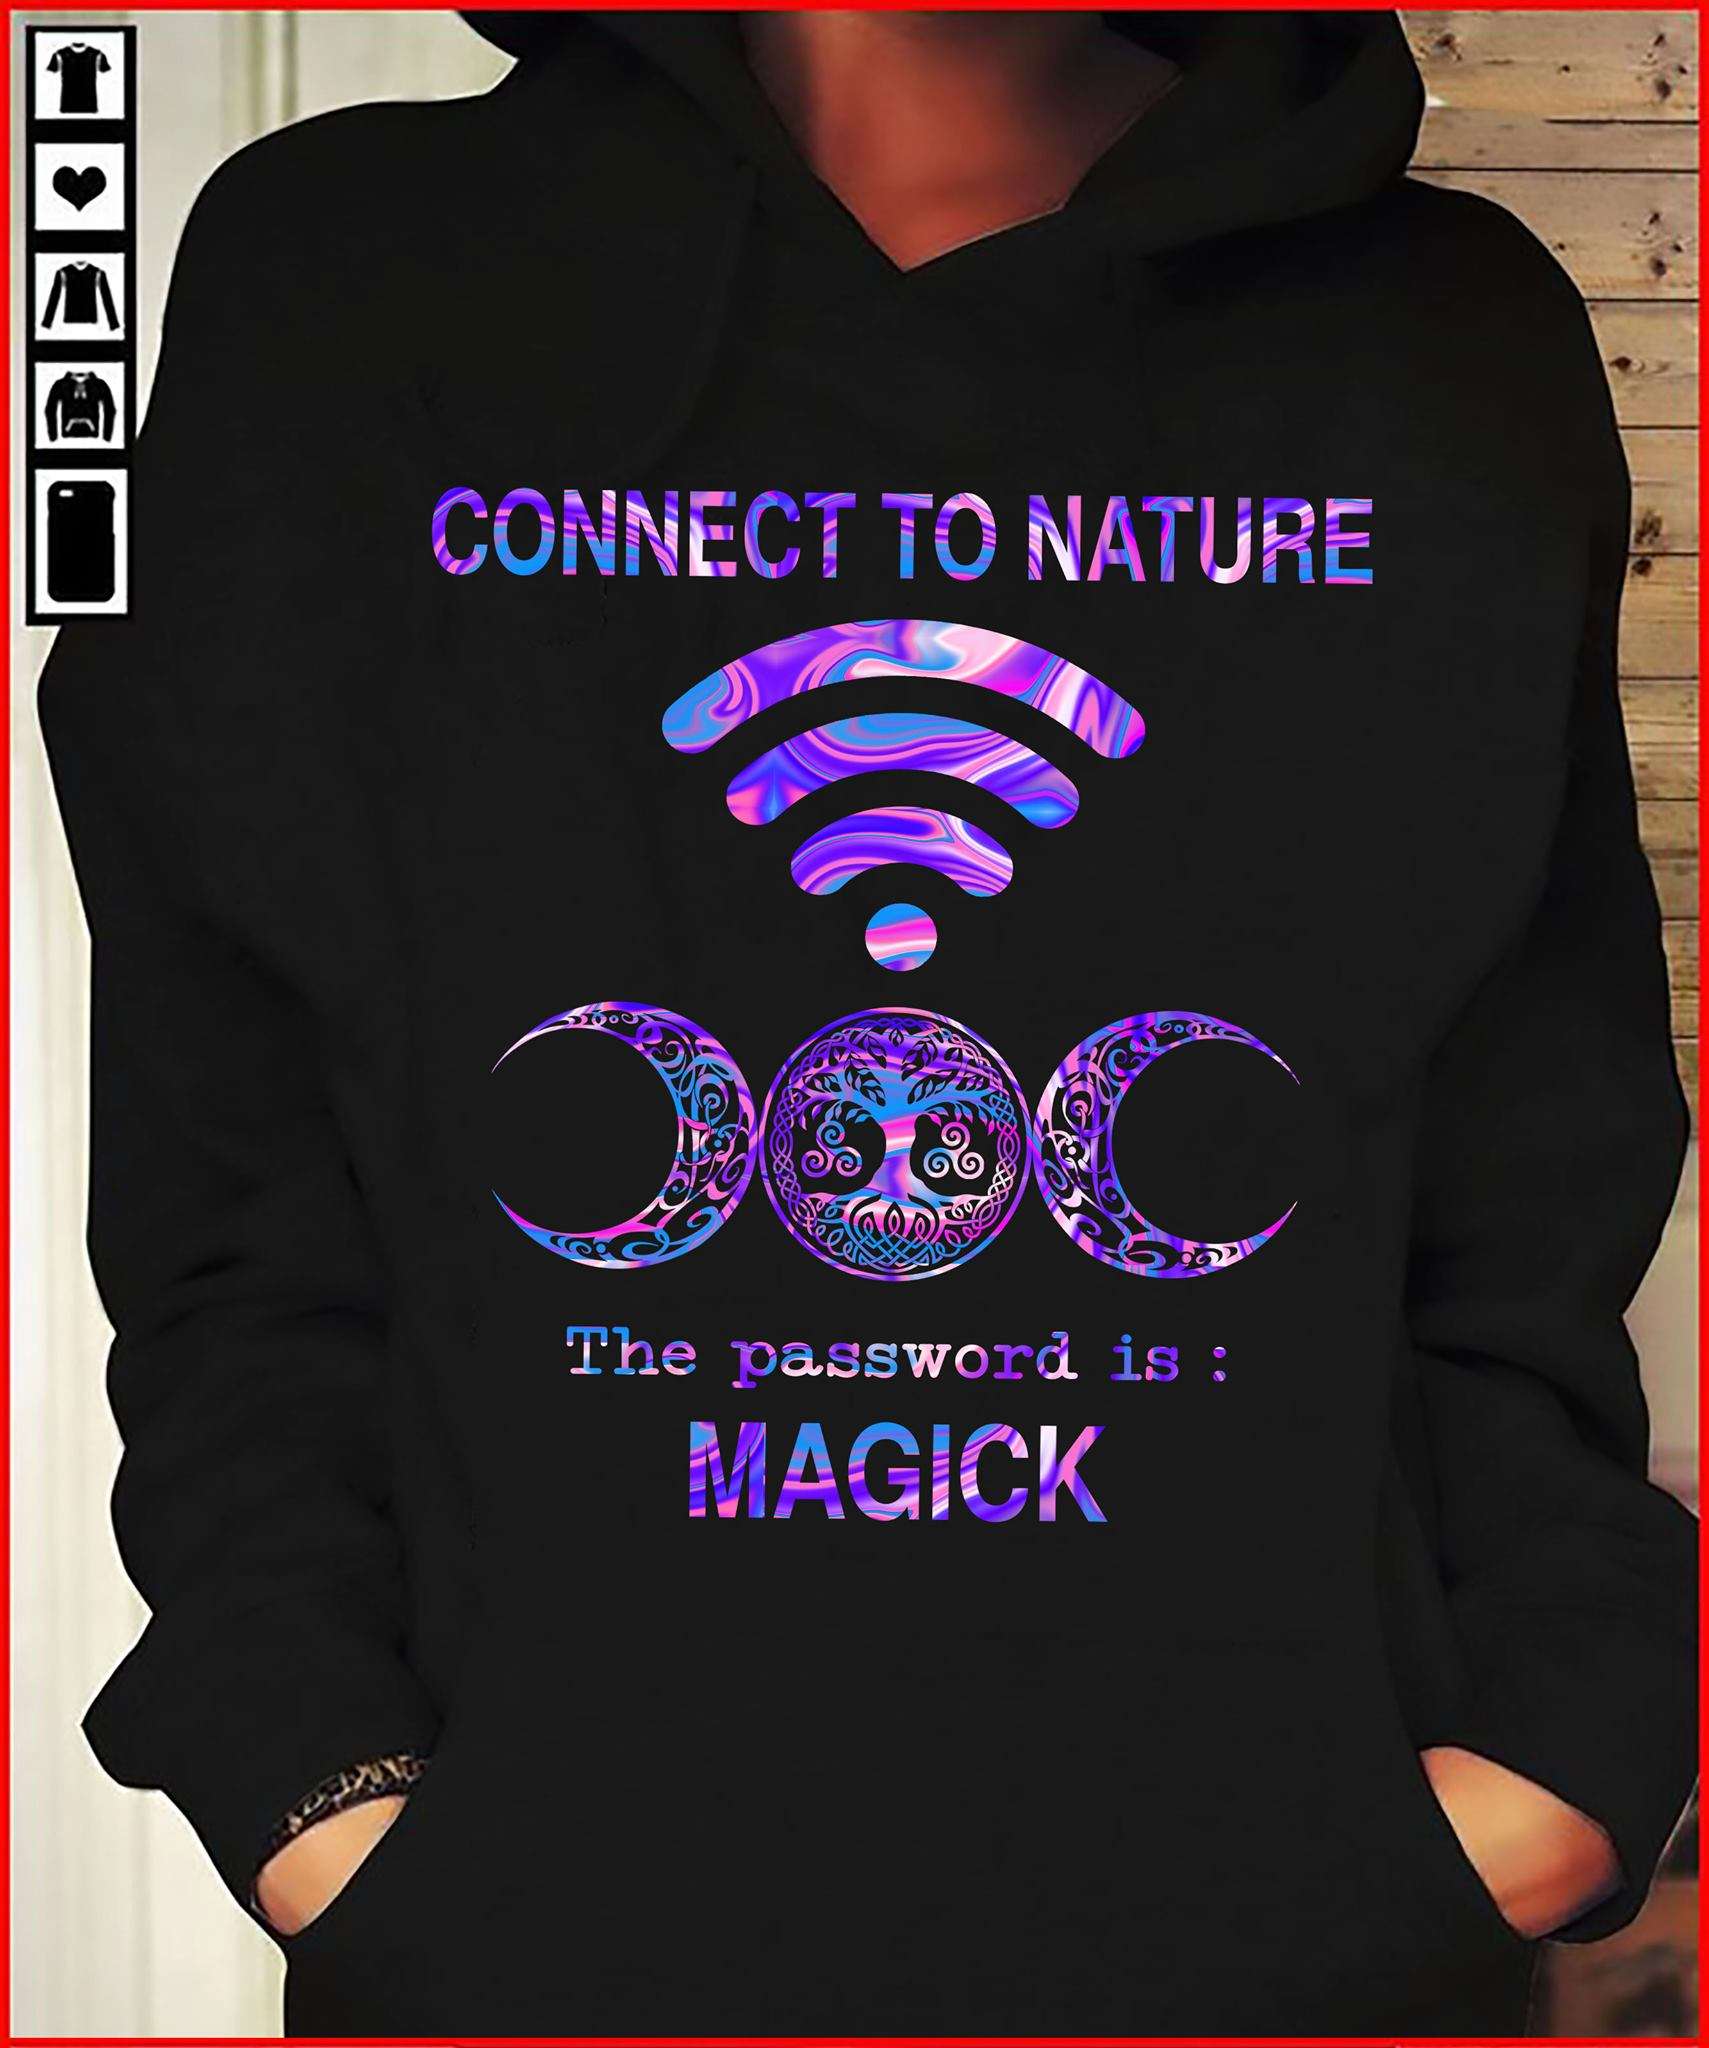 Connect to nature - The password is macgick, Wifi connection to nature